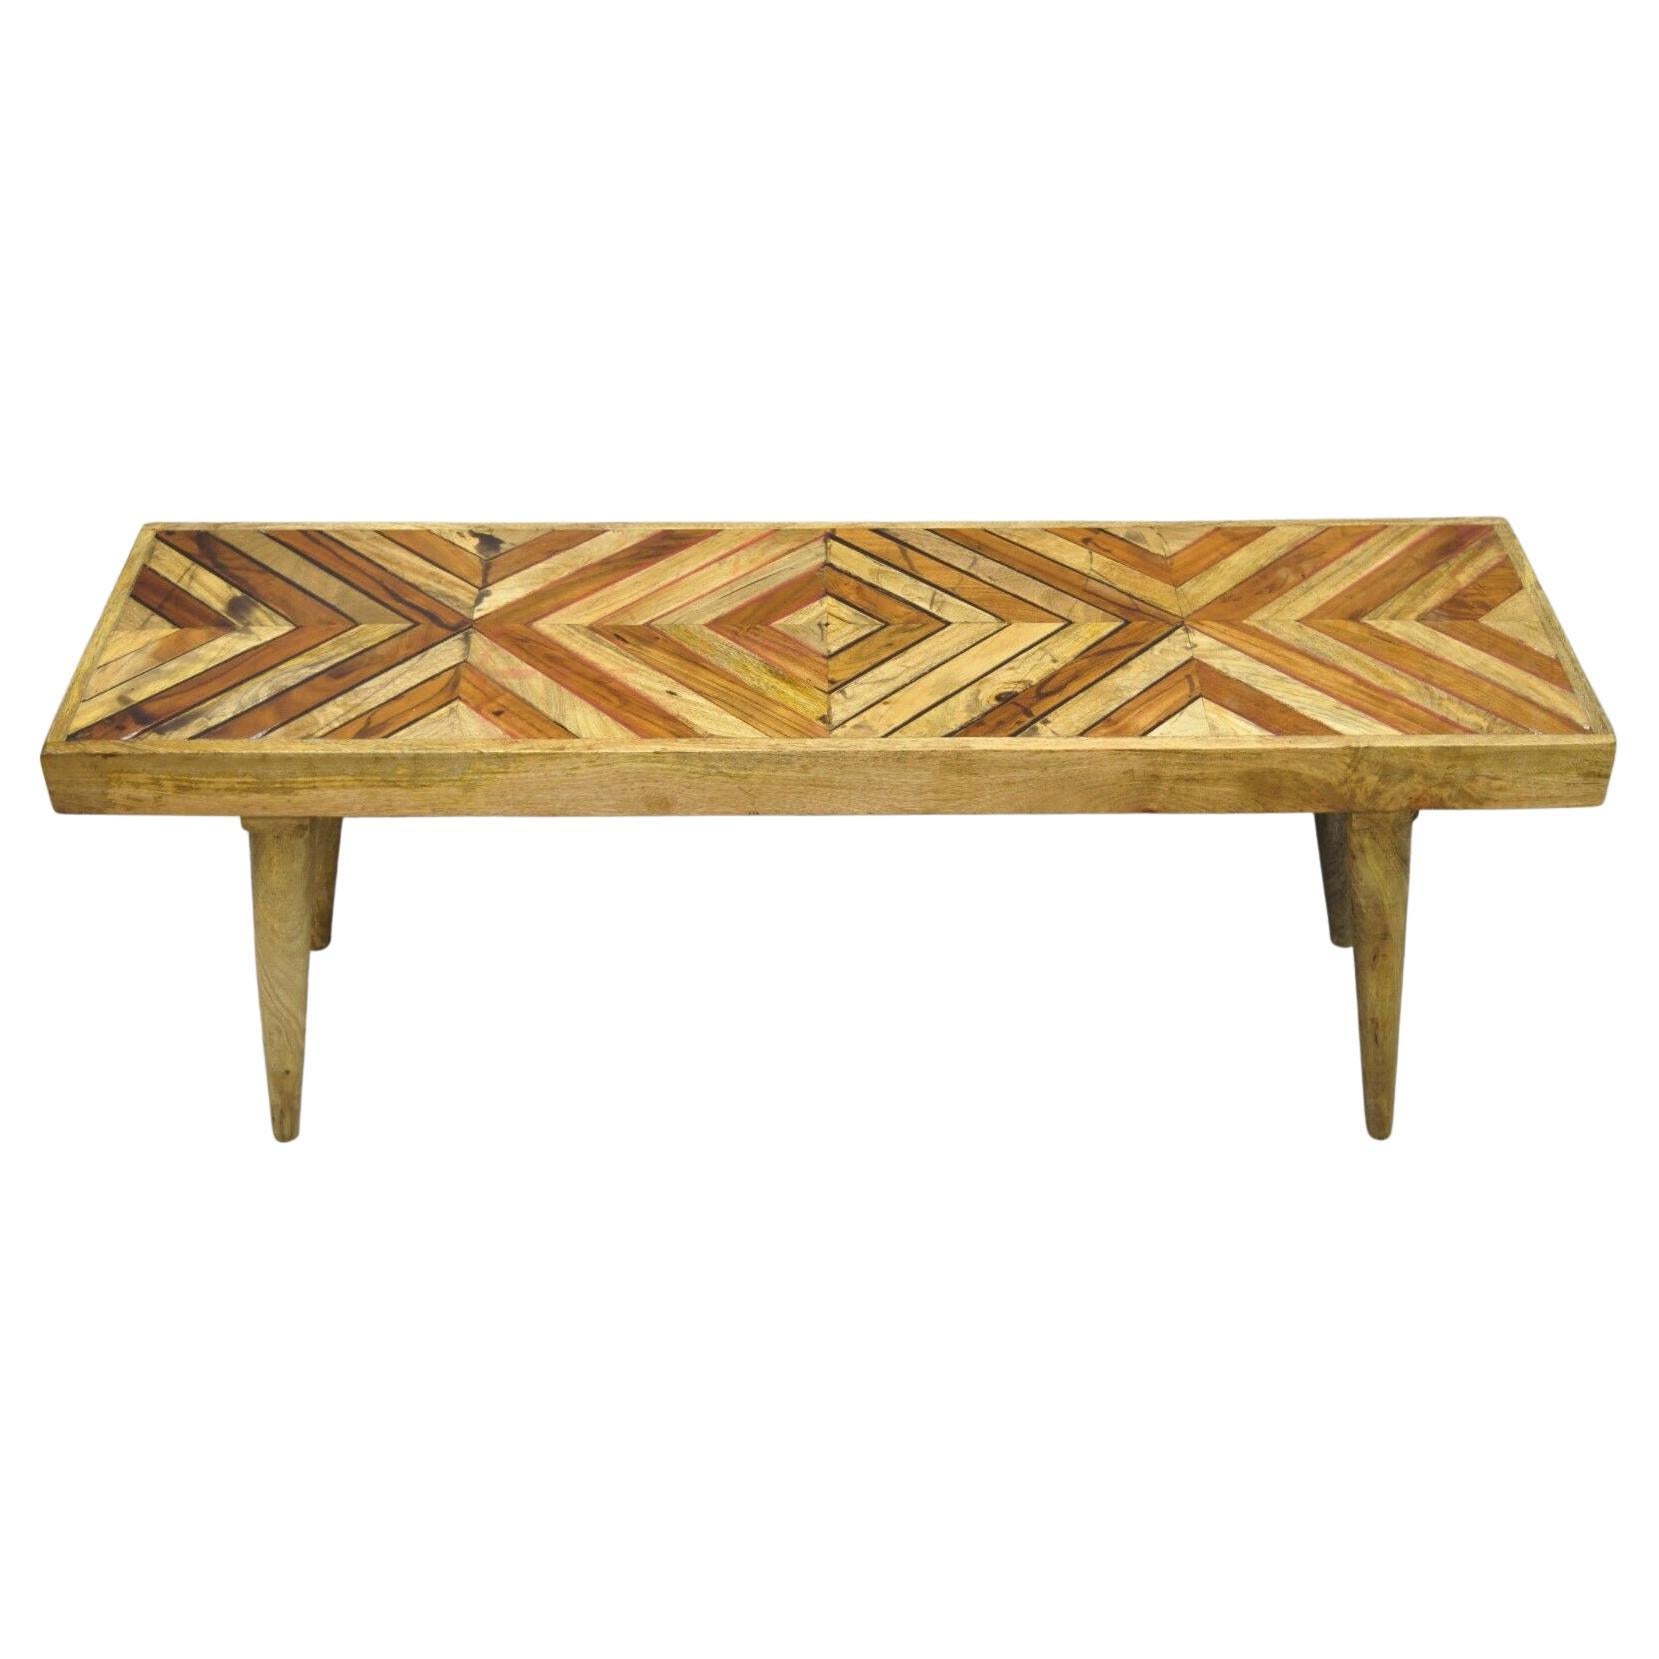 Modern Slatted Wood Geometric Inlay Rustic Farmhouse Coffee Table Bench For Sale